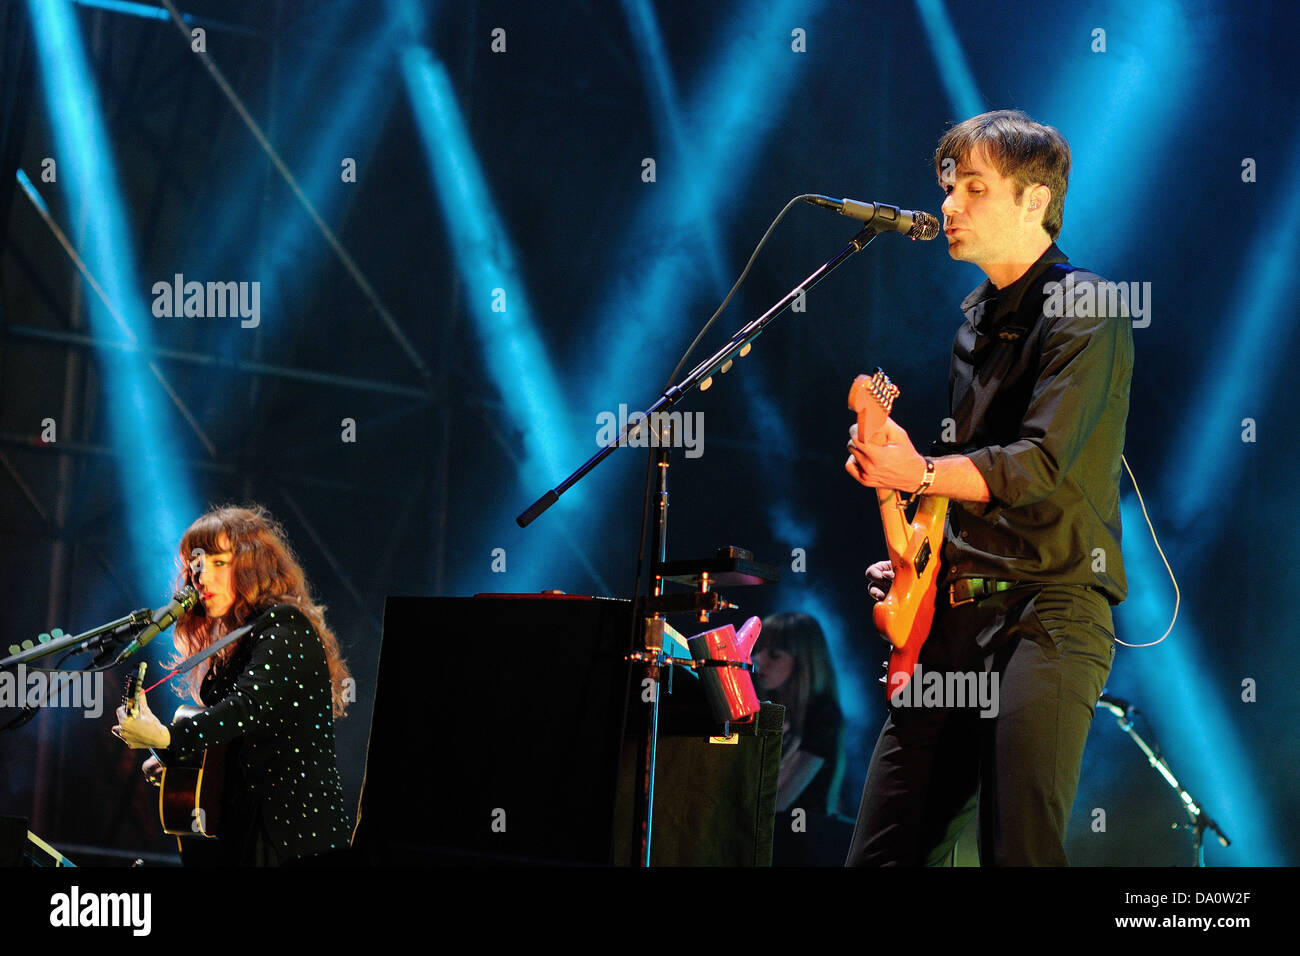 BARCELONA - MAY 23: The Postal Service, American electronic musical group, performs at Heineken Primavera Sound 2013 Festival. Stock Photo